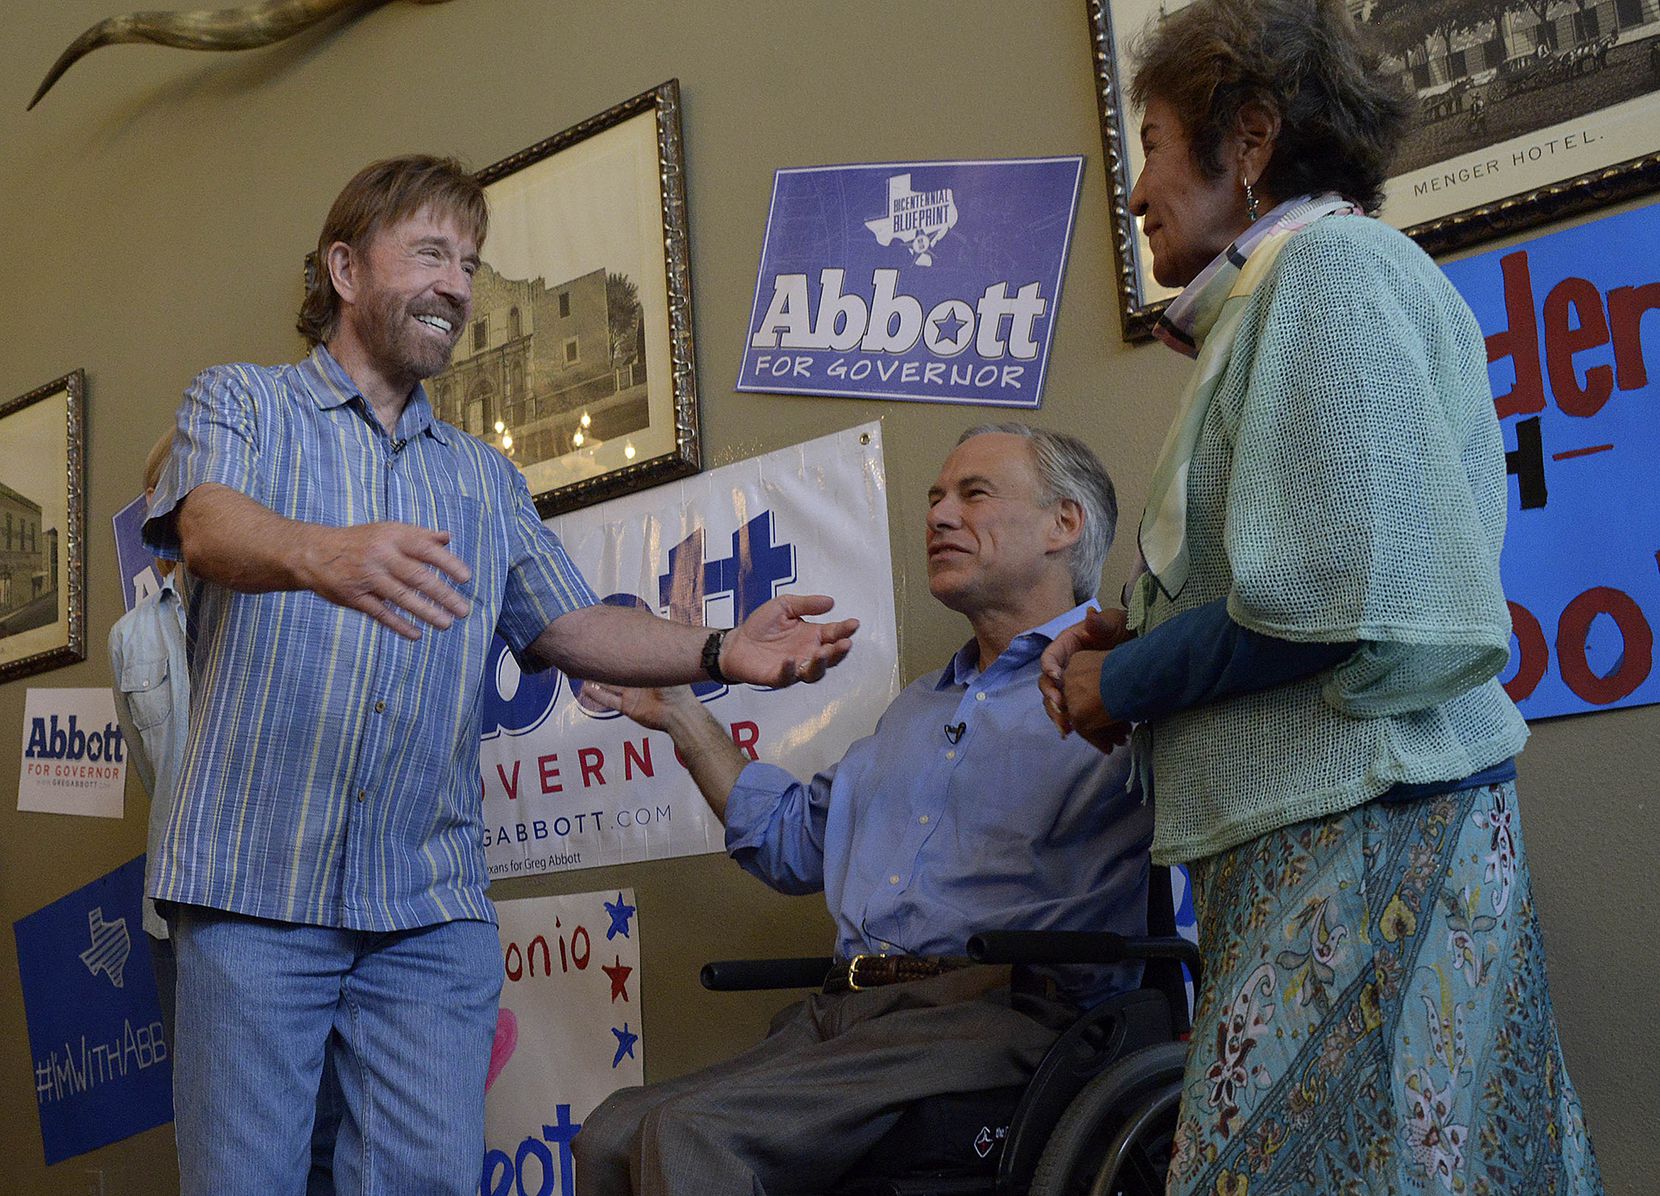 Then-Texas Attorney General Greg Abbott, middle, introduces actor Chuck Norris to his mother-in-law, Mary Lucy Phalen, during an October 2014 event in San Antonio as Abbott first ran for governor.